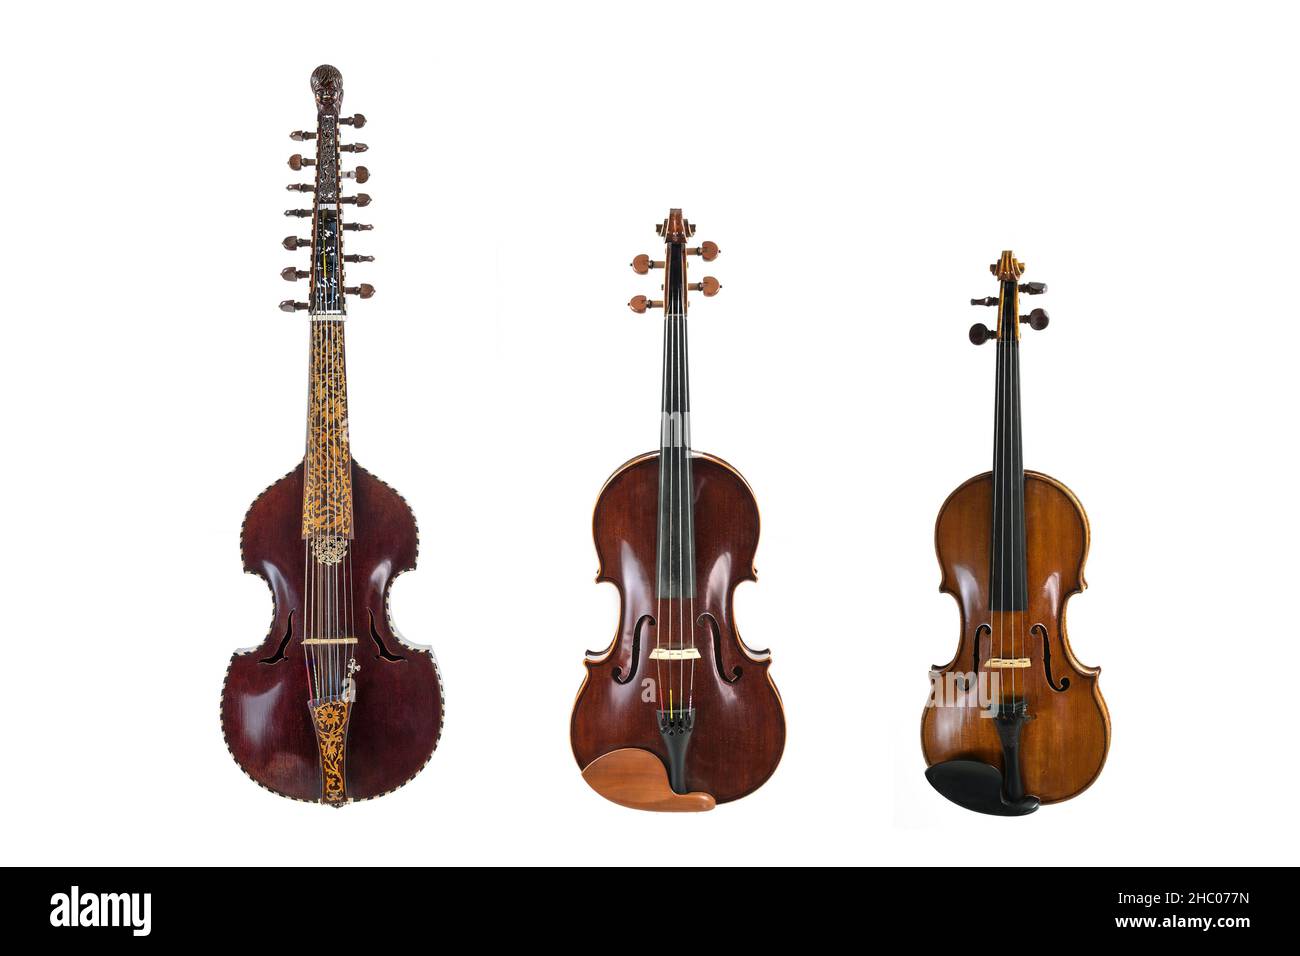 Three stringed musical instruments of the viol family in comparison, viola d amore, viola and violin, isolated on a white background, copy space Stock Photo